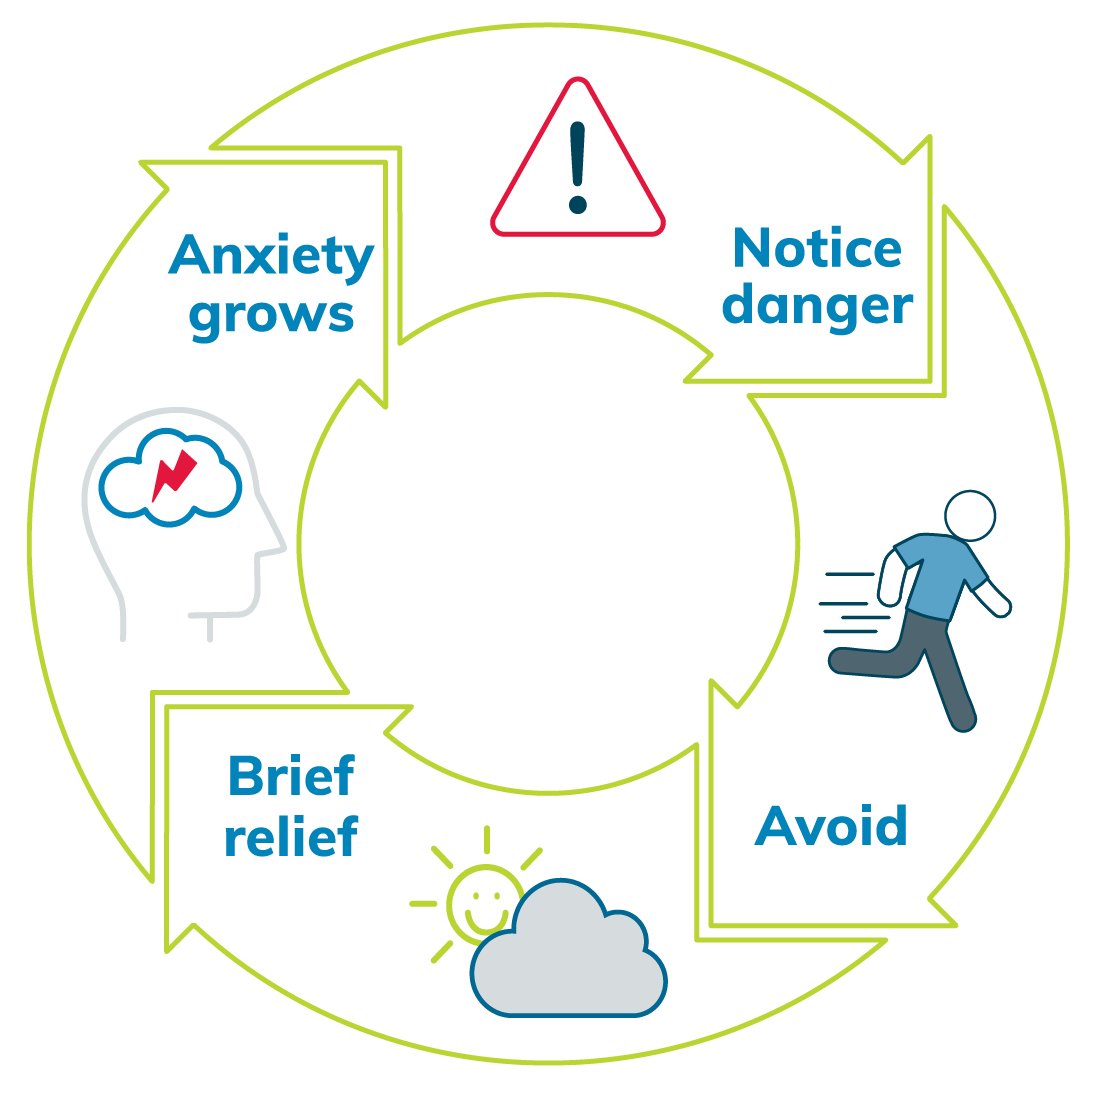 The cycle of anxiety describes how noticing danger, leads to avoidance, leading to a brief relief which makes anxiety grow. 